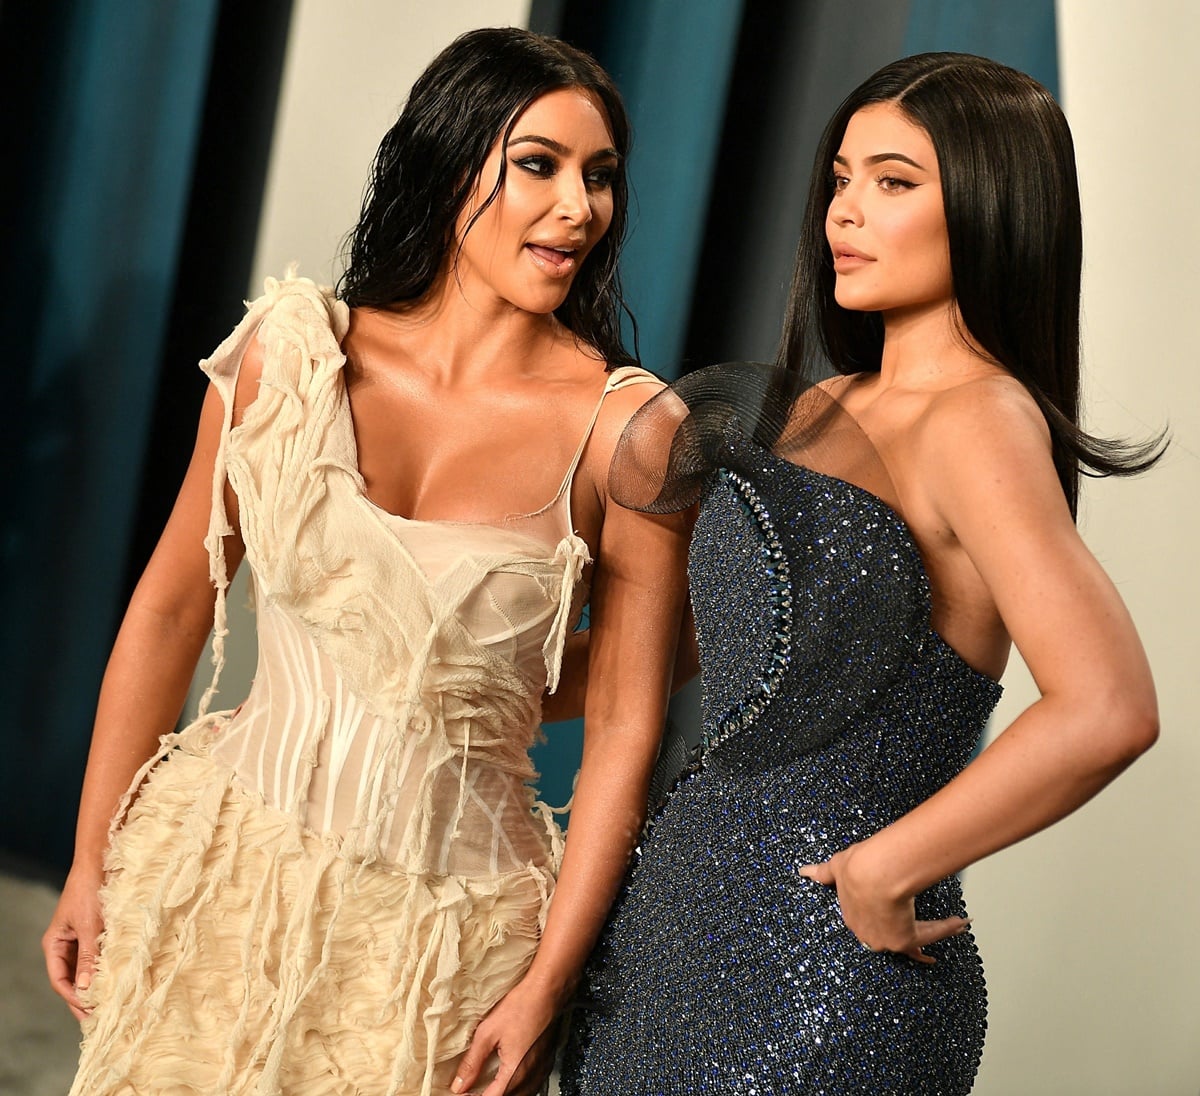 According to Kylie Jenner, her choice of favorite sister changes over time, but she's been feeling particularly connected to Kim lately, and they have been going through similar experiences